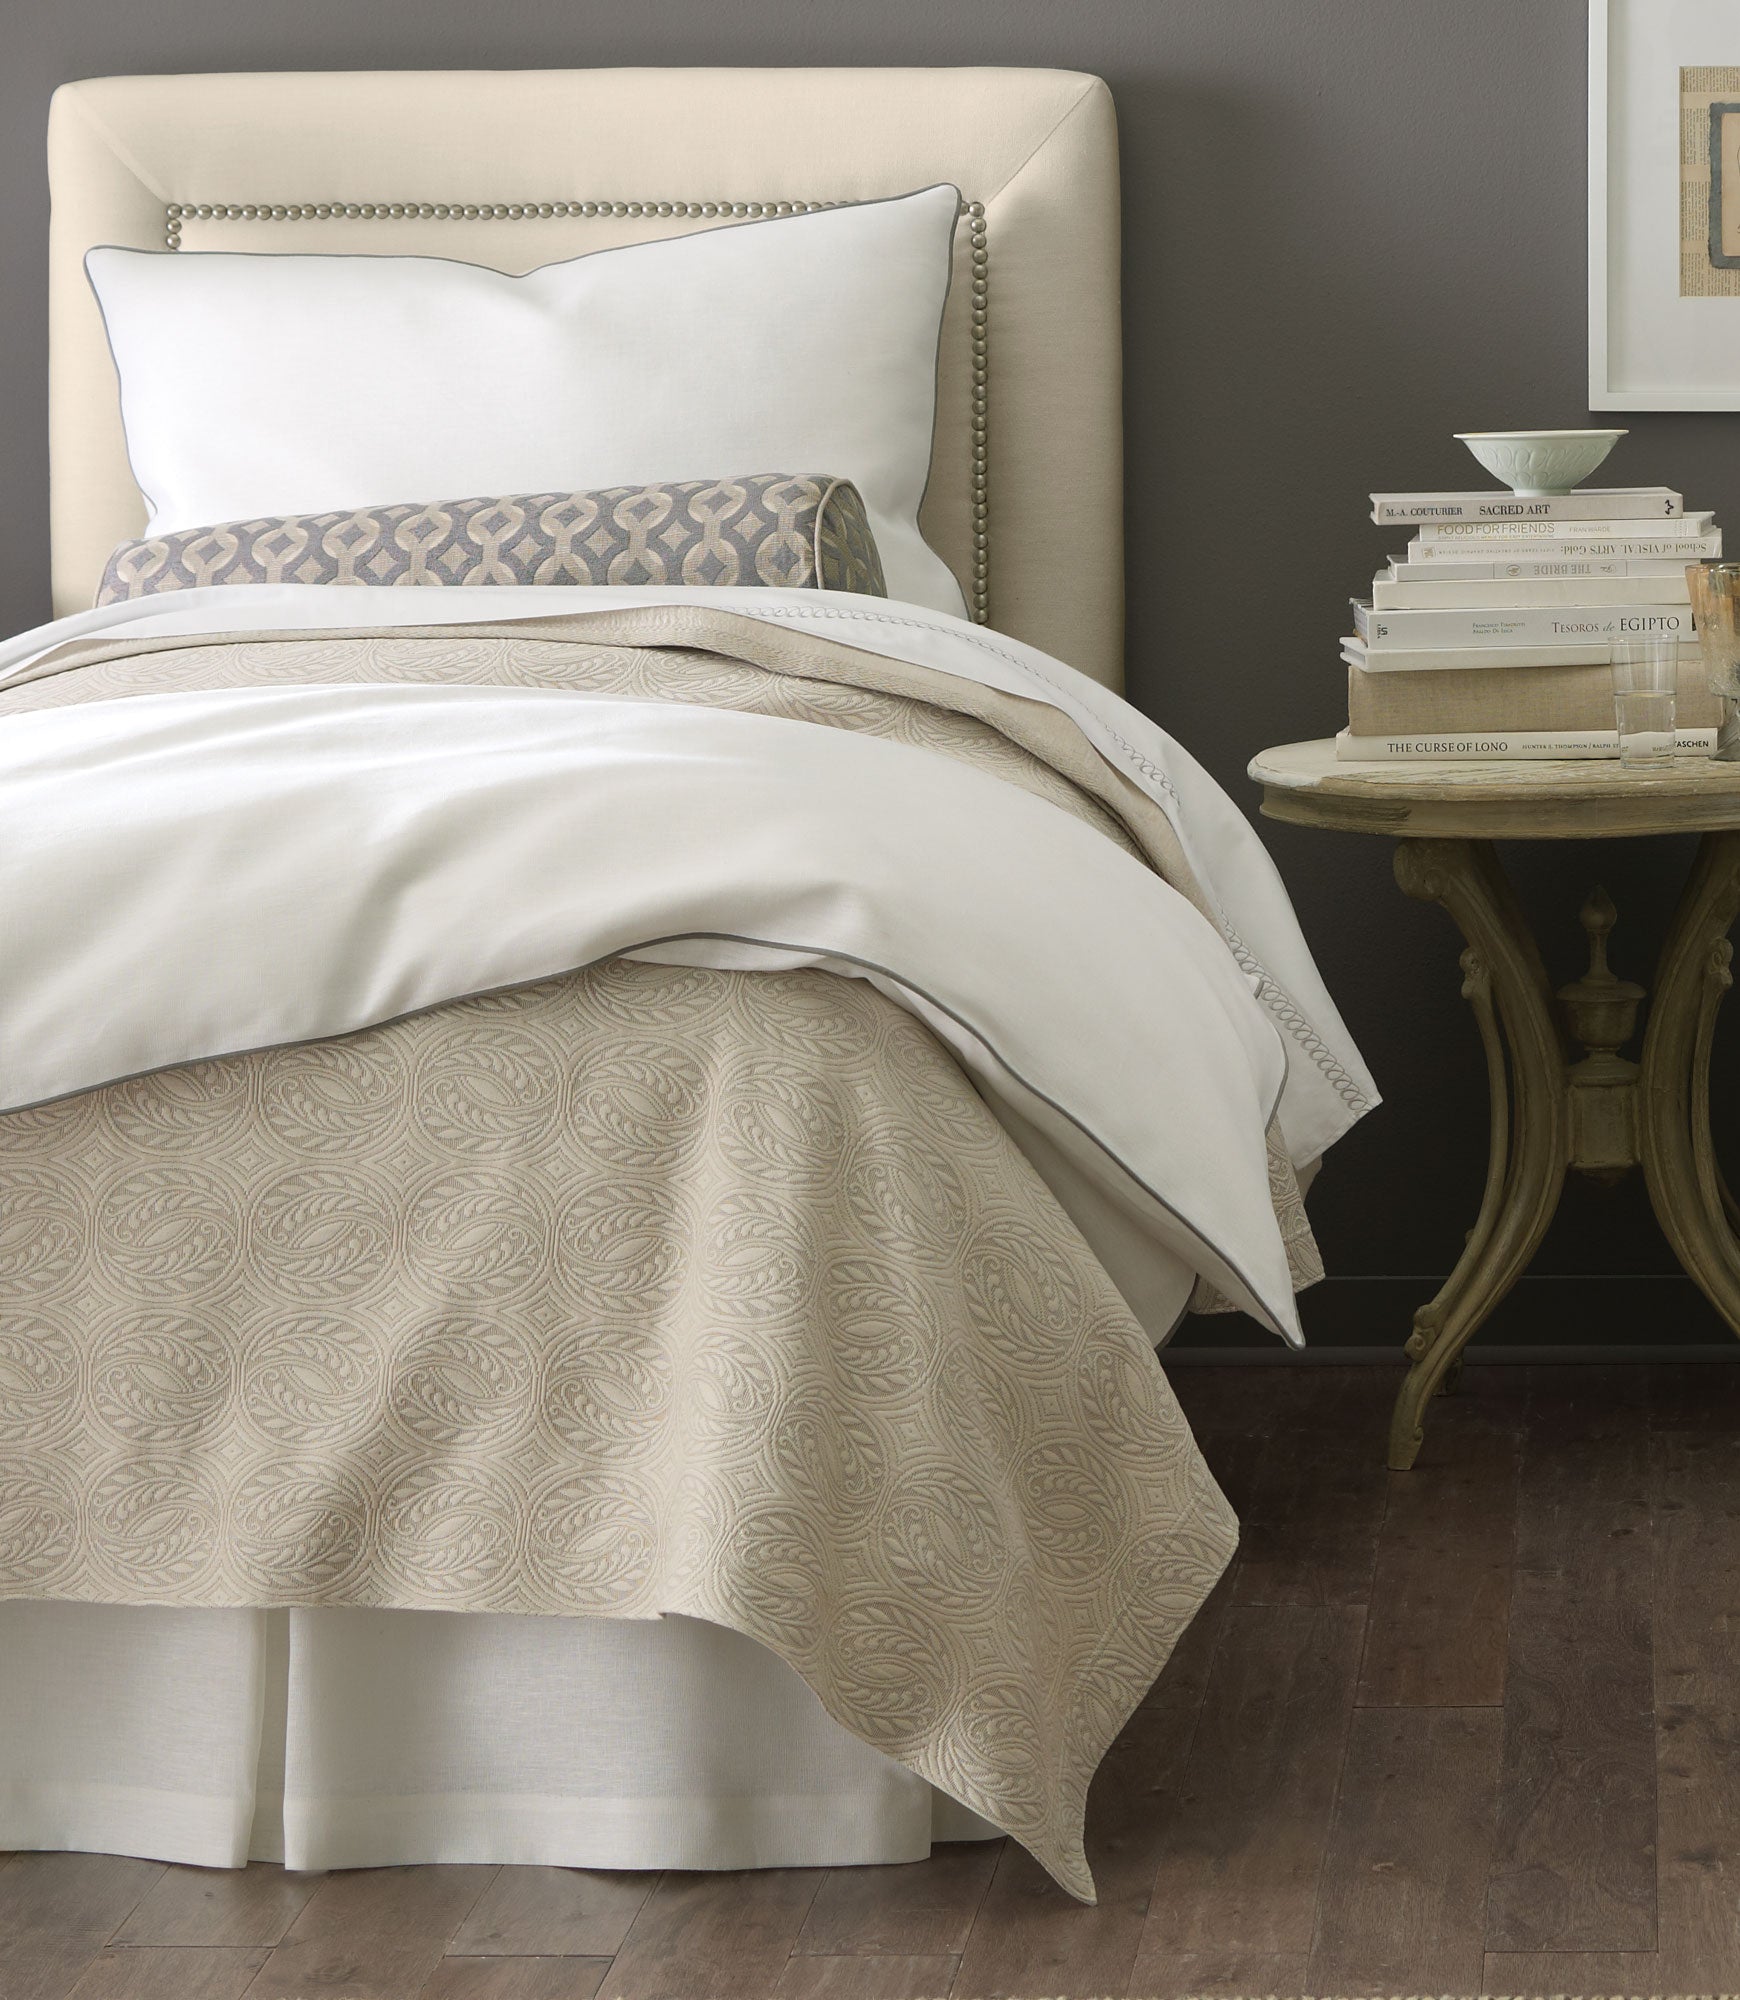 6 Ways to Make A Bed Skirt Stay In Place And Prevent Sliding